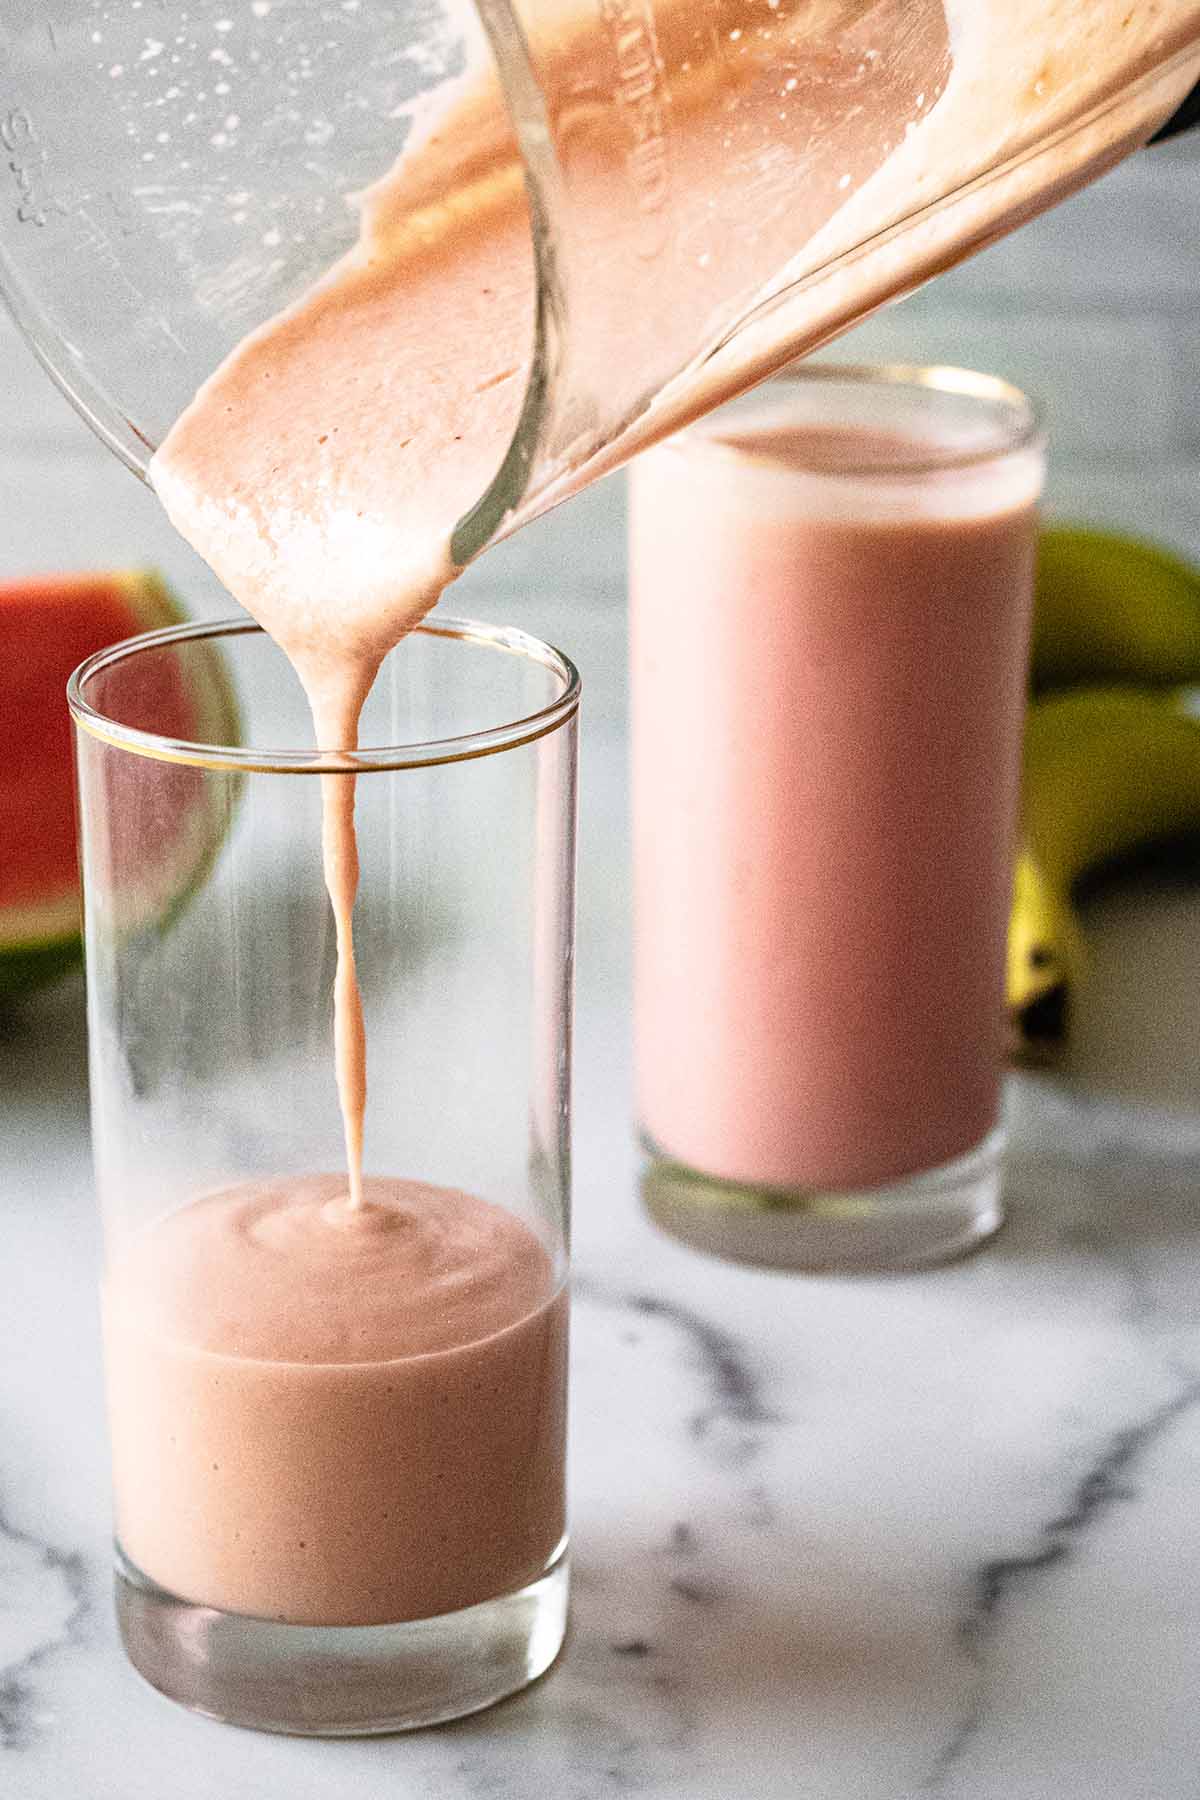 Watermelon banana smoothie being poured into a tall chilled glass